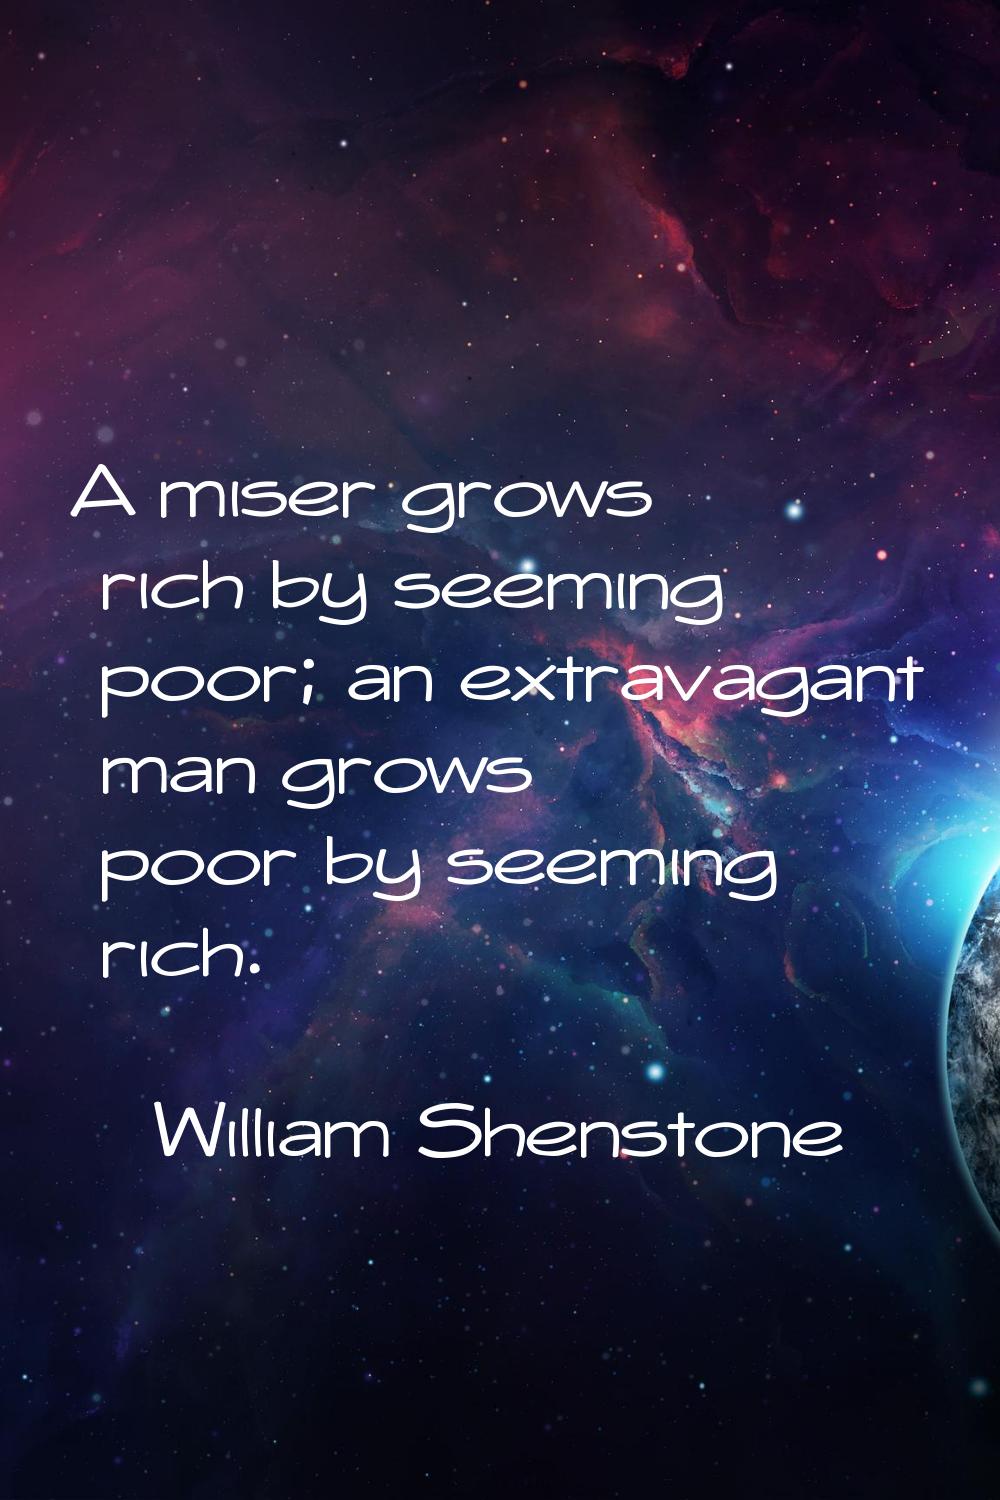 A miser grows rich by seeming poor; an extravagant man grows poor by seeming rich.